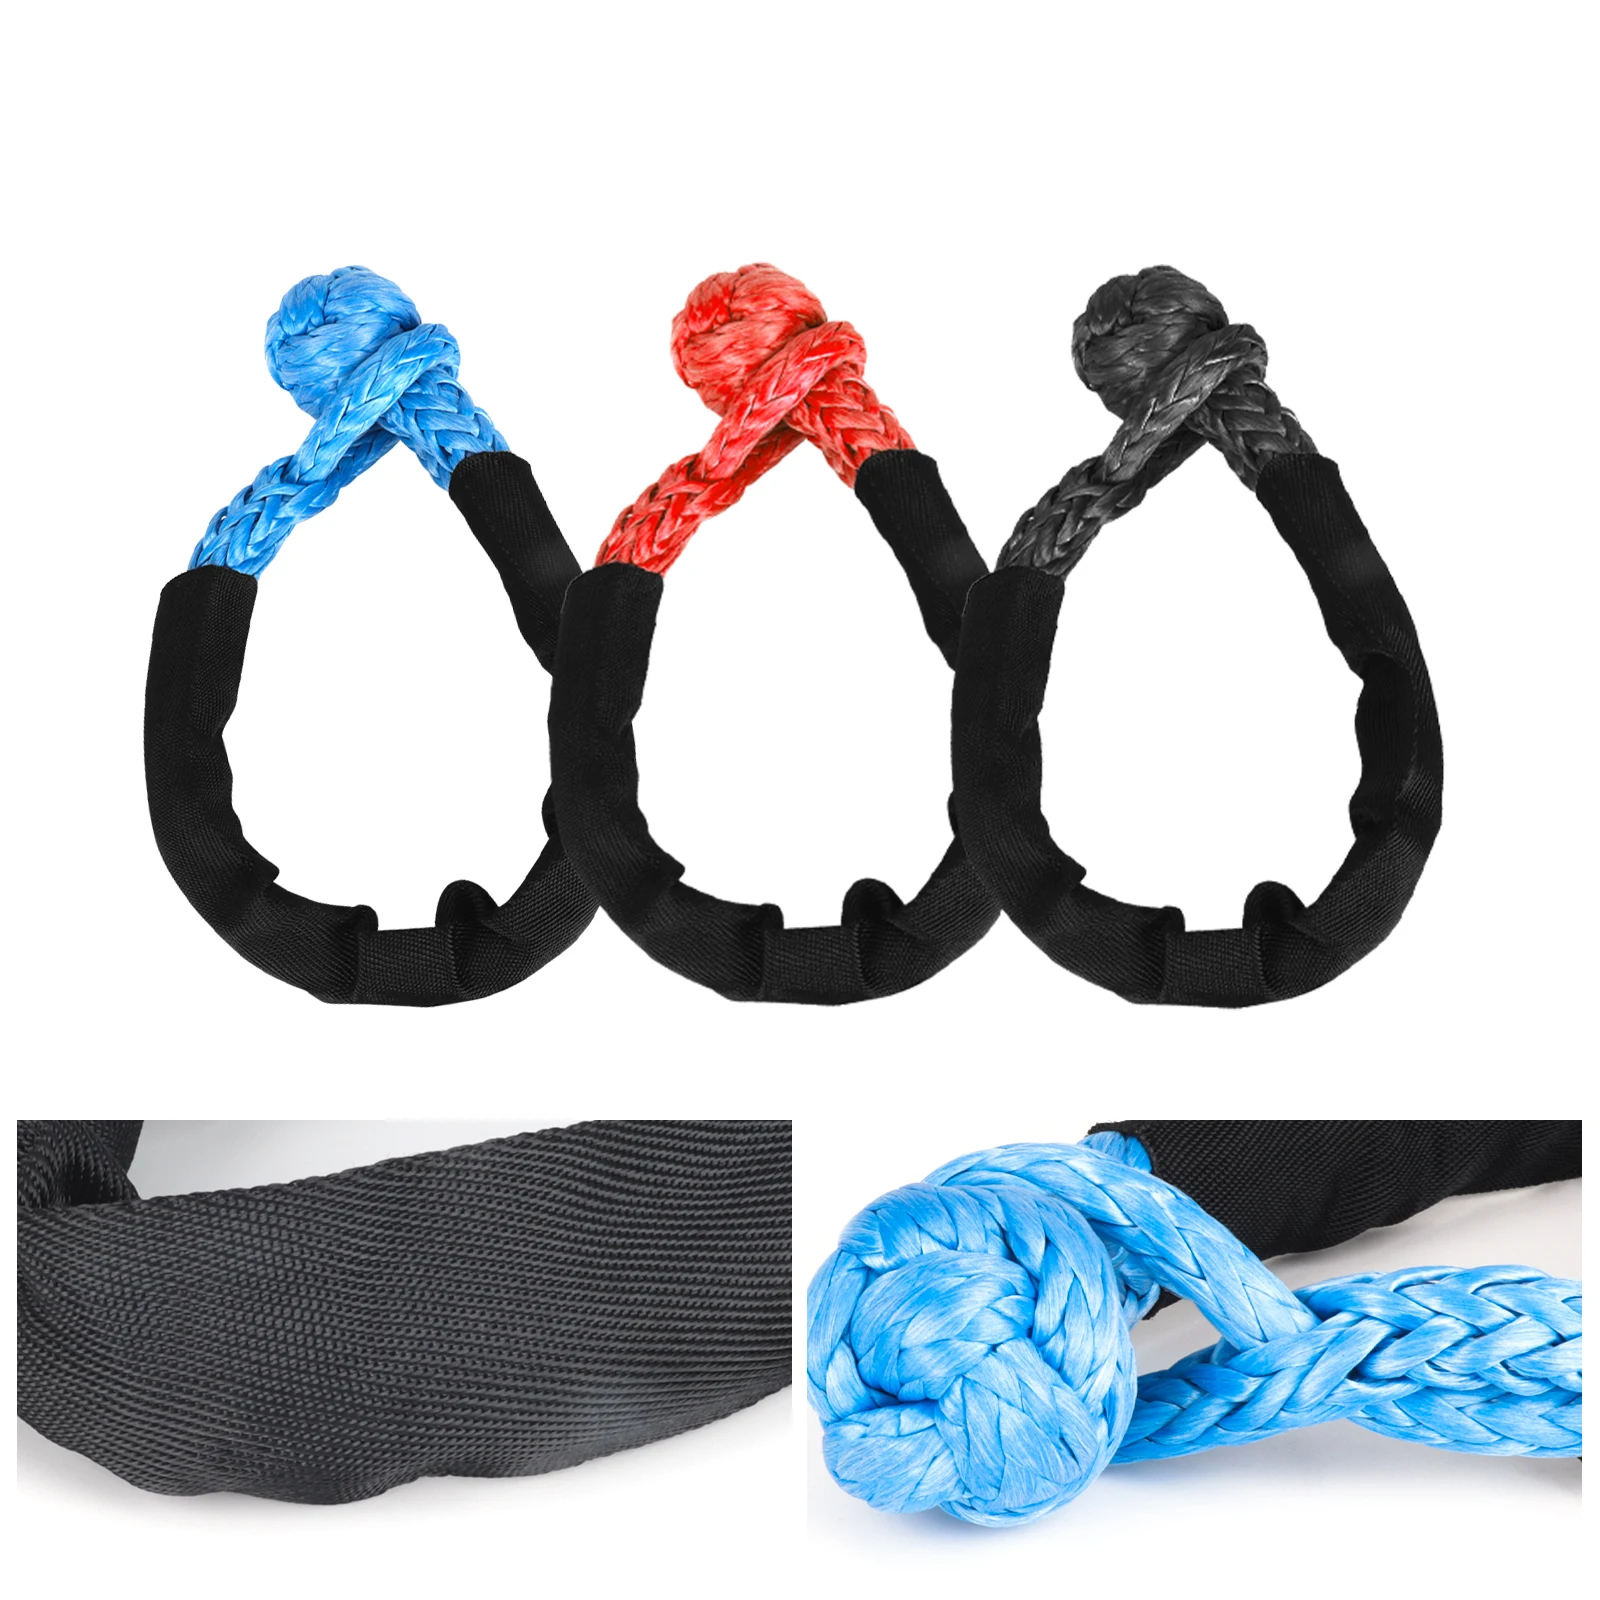 41000lbs Soft Shackle Synthetic Rope Heavy Duty Offroad 4X4 Tow Shackle Strap with Protective Sleeve for Jeep Truck SUV